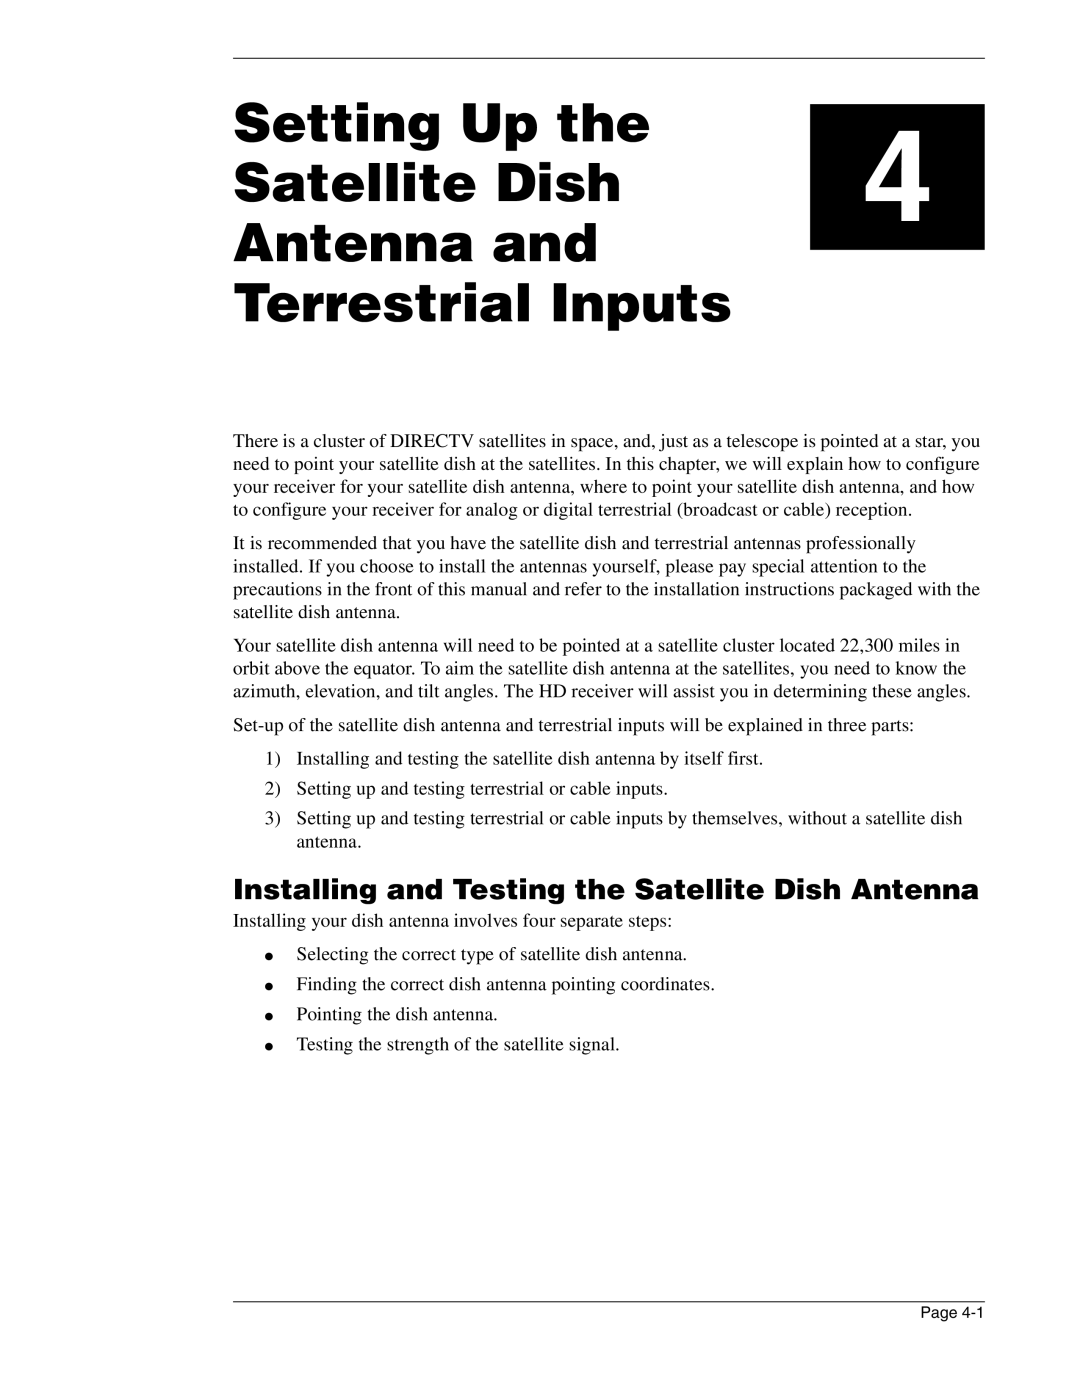 DirecTV HIRD-E86 manual Setting Up the Satellite Dish Antenna and, Terrestrial Inputs 